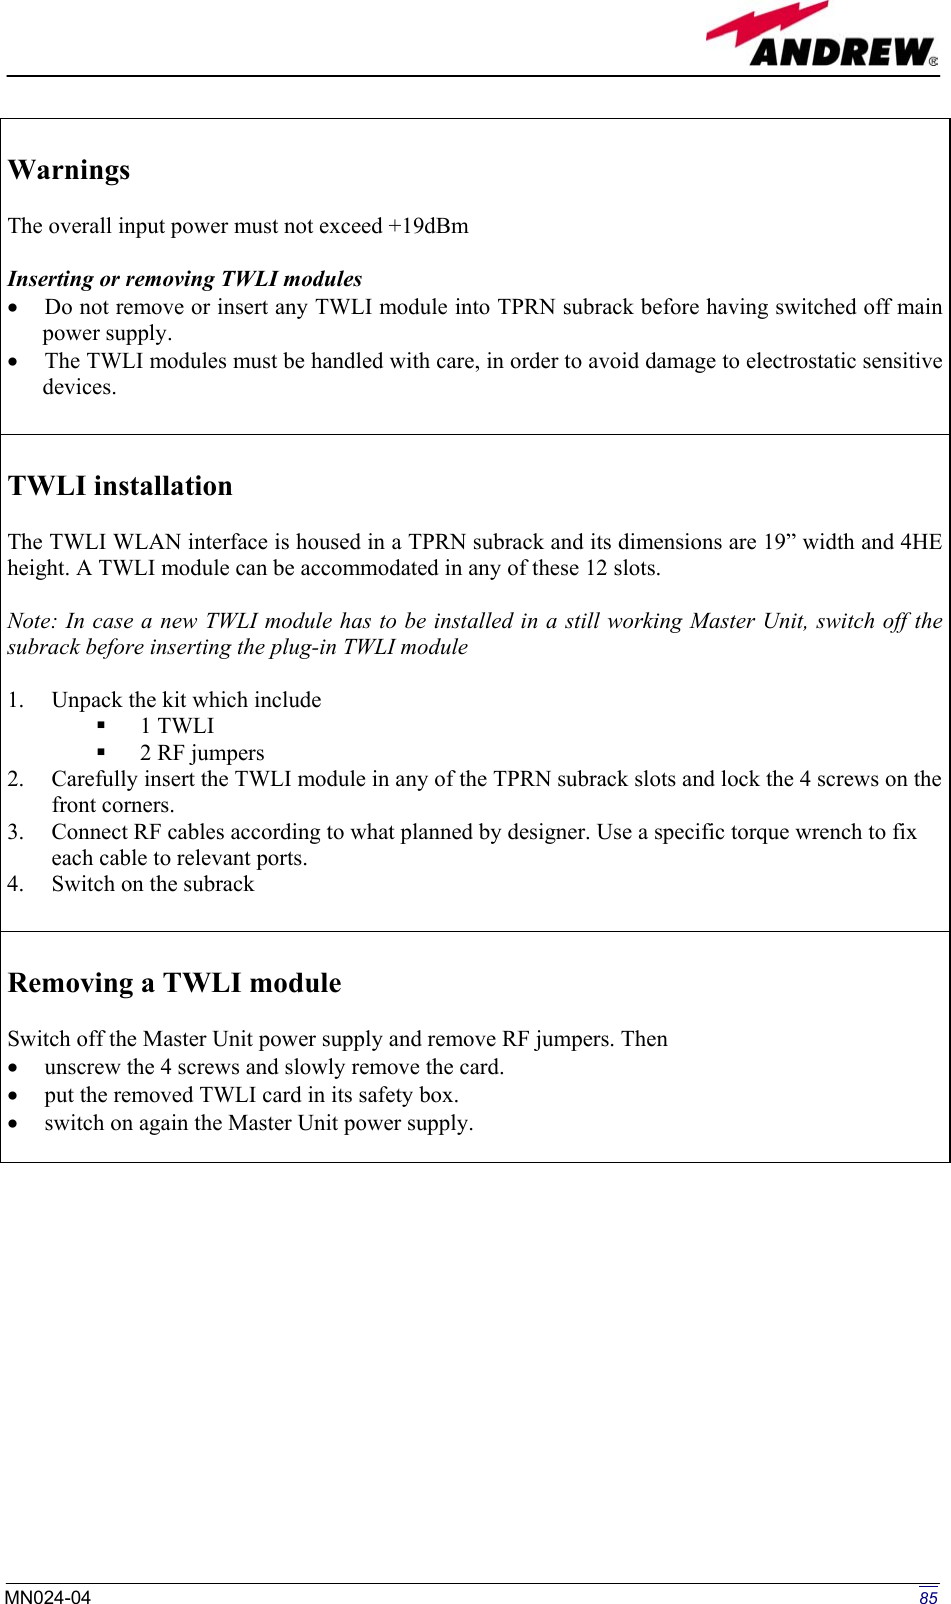   Warnings  The overall input power must not exceed +19dBm  Inserting or removing TWLI modules •  Do not remove or insert any TWLI module into TPRN subrack before having switched off main power supply. •  The TWLI modules must be handled with care, in order to avoid damage to electrostatic sensitive devices.   TWLI installation  The TWLI WLAN interface is housed in a TPRN subrack and its dimensions are 19” width and 4HE height. A TWLI module can be accommodated in any of these 12 slots.  Note: In case a new TWLI module has to be installed in a still working Master Unit, switch off the subrack before inserting the plug-in TWLI module  1.  Unpack the kit which include   1 TWLI   2 RF jumpers 2.  Carefully insert the TWLI module in any of the TPRN subrack slots and lock the 4 screws on the front corners. 3.  Connect RF cables according to what planned by designer. Use a specific torque wrench to fix each cable to relevant ports. 4.  Switch on the subrack   Removing a TWLI module  Switch off the Master Unit power supply and remove RF jumpers. Then  •  unscrew the 4 screws and slowly remove the card. •  put the removed TWLI card in its safety box. •  switch on again the Master Unit power supply.              85MN024-04  